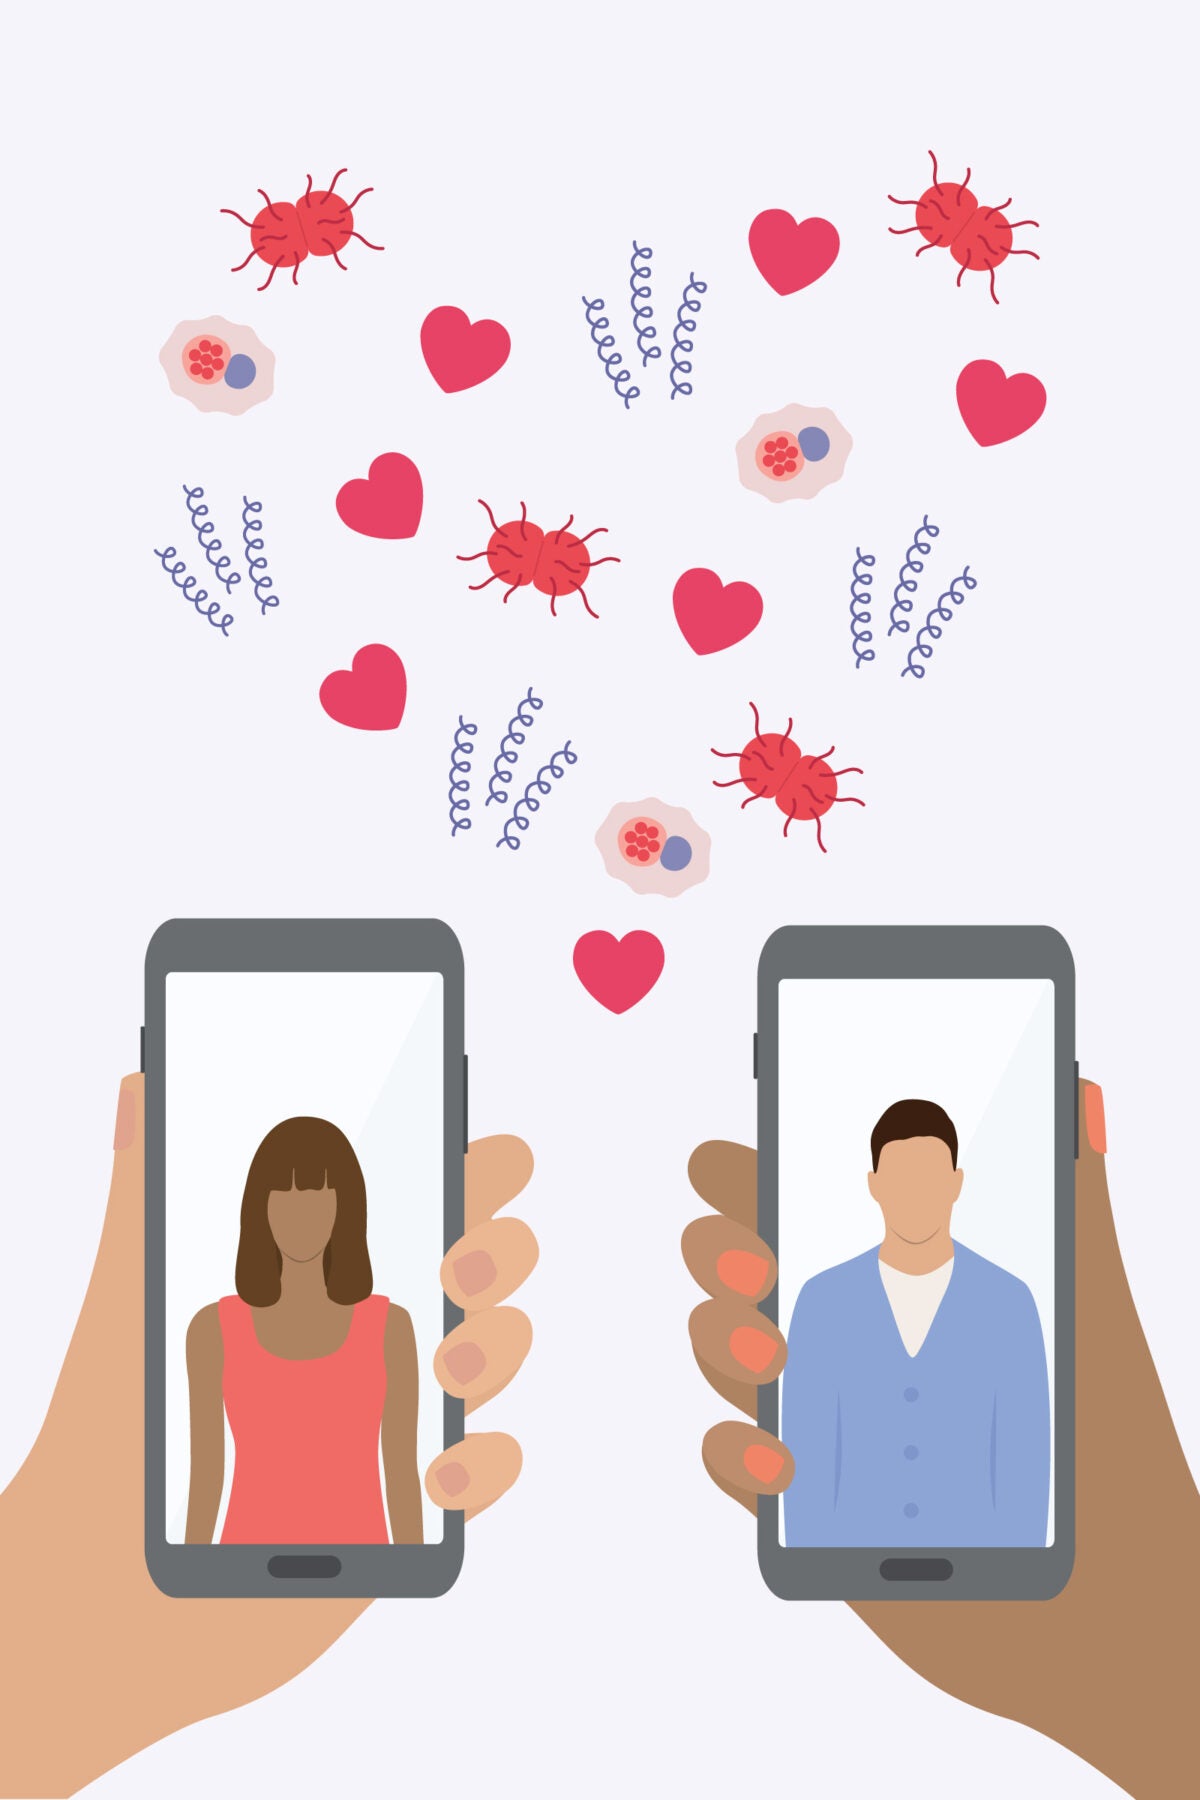 Illustration: Two different hands hold up opposite online dating profiles. In the negative space between the hands are illustrated hearts but also illustrated STI viruses: syphilis, gonorrhea, and chlamydia. The composition is on a pale lavender background.